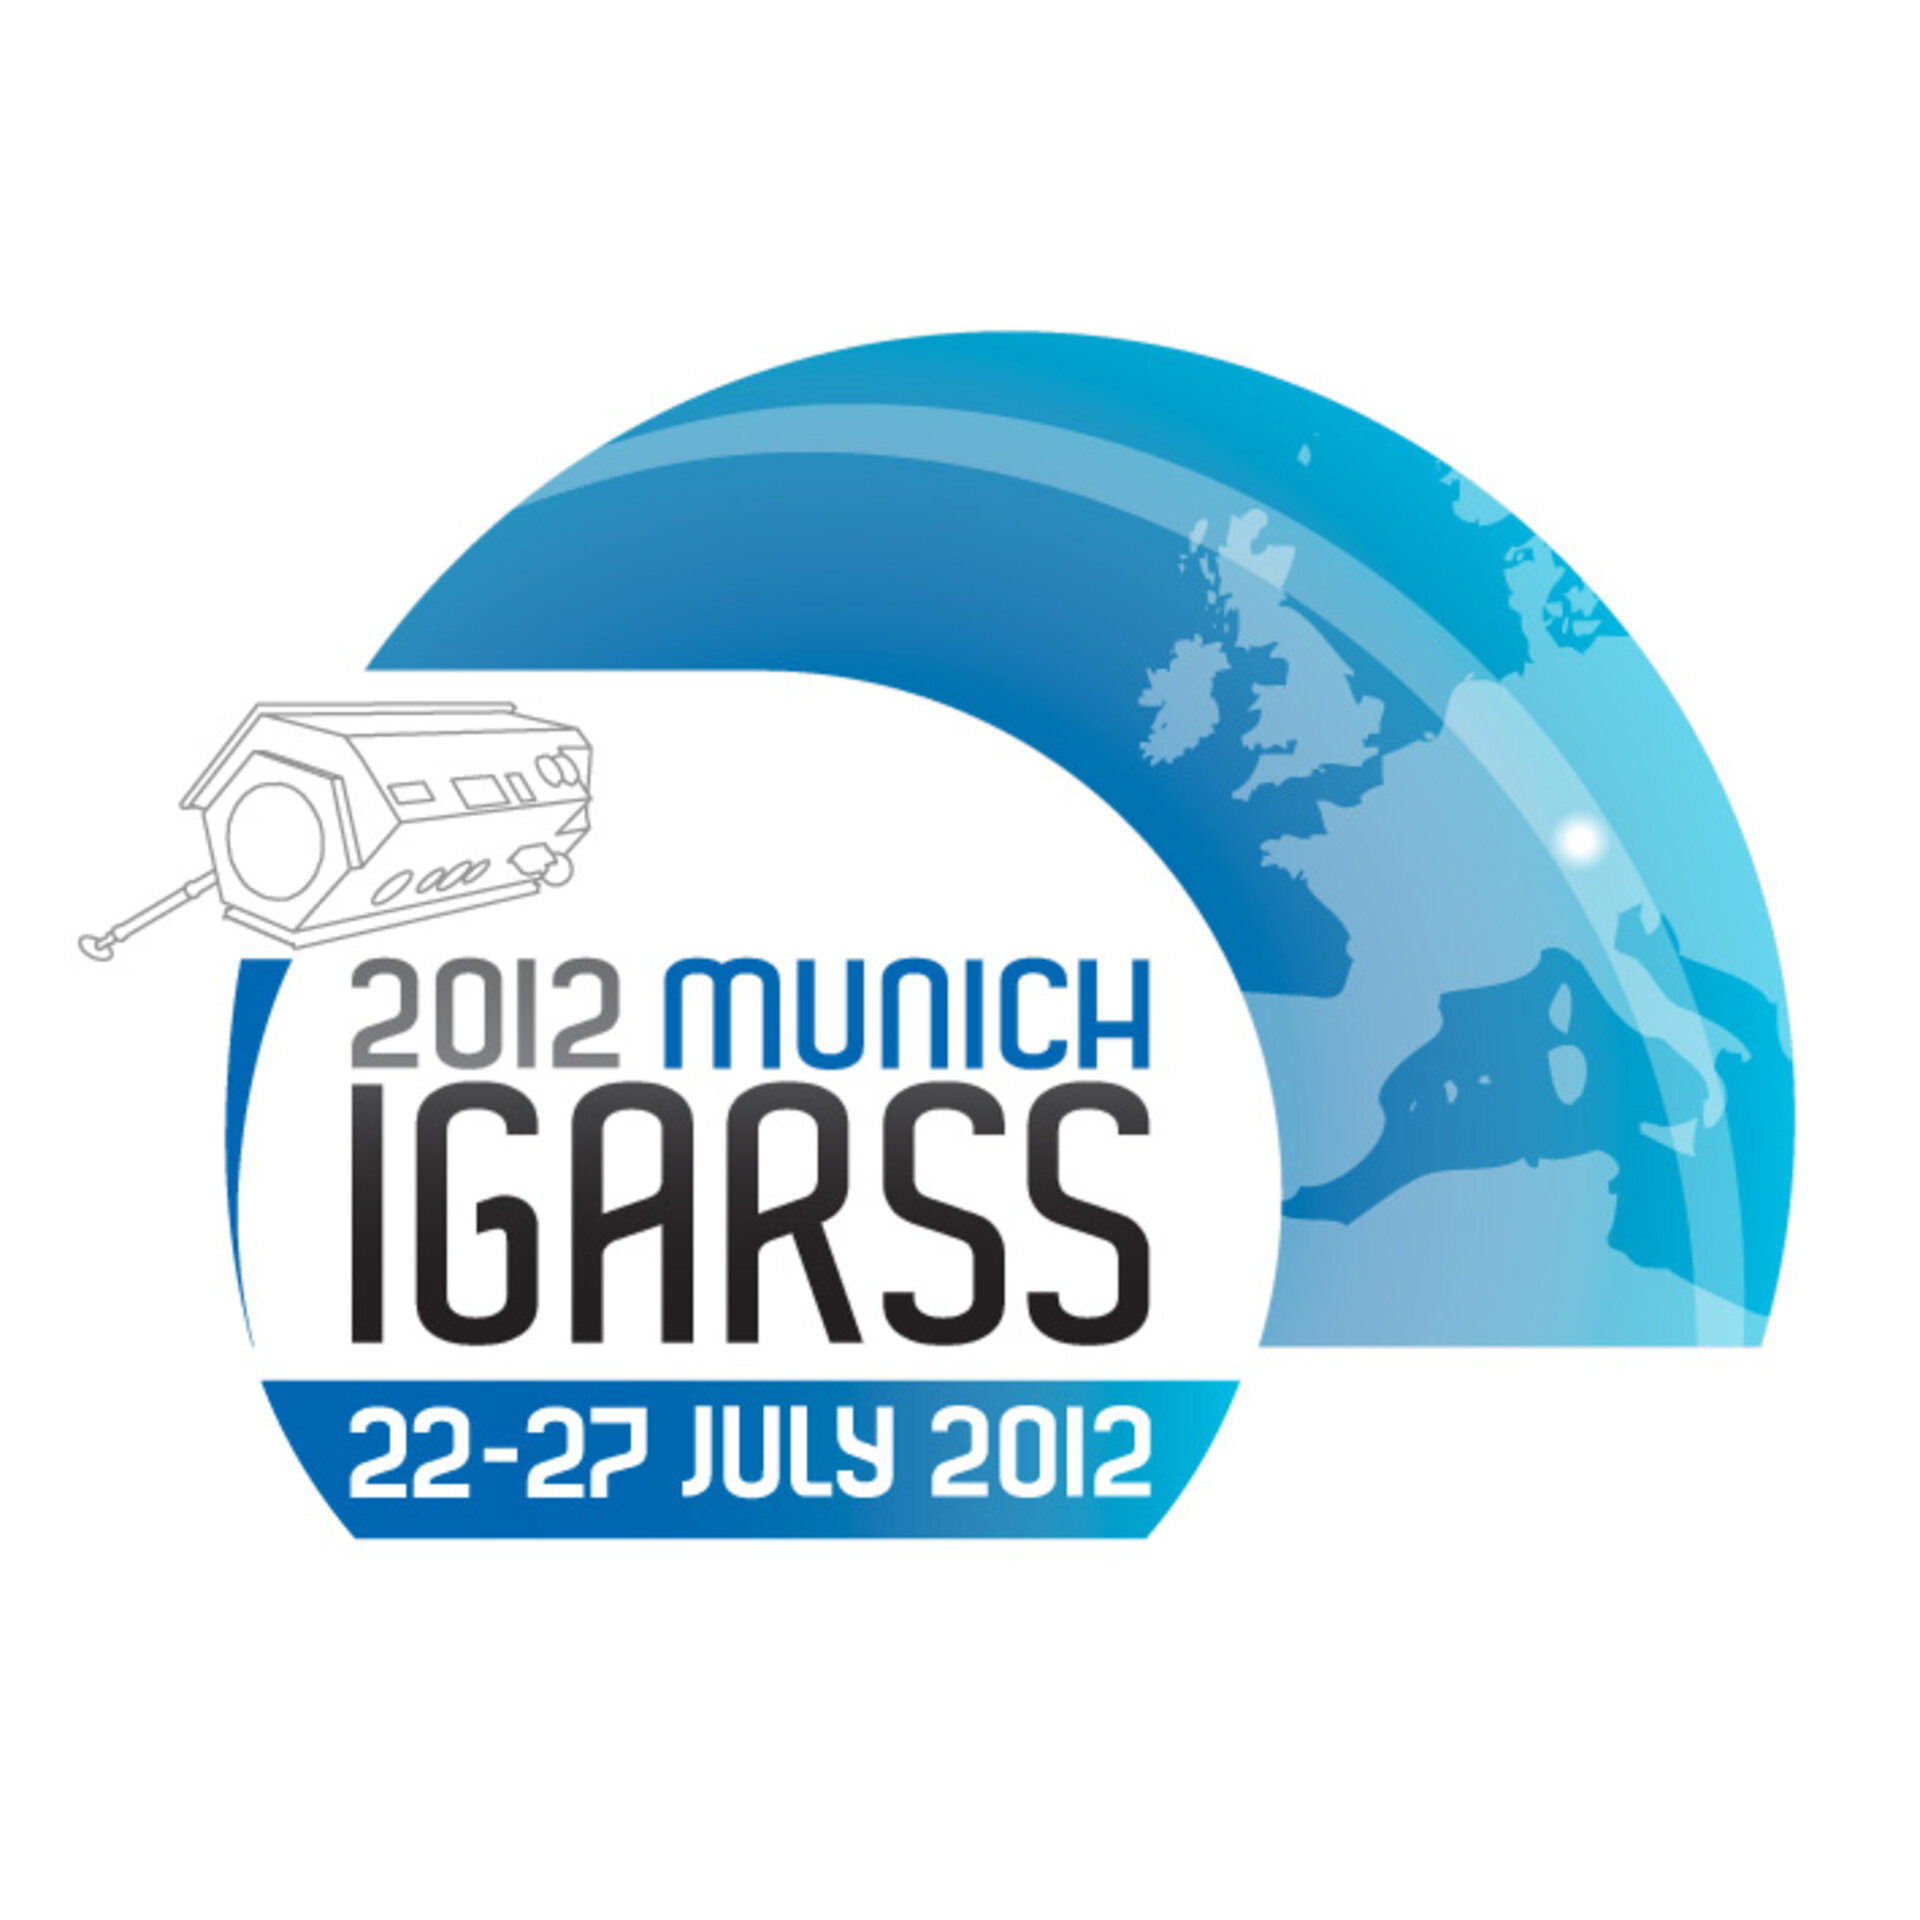 IGARSS 2012 in München